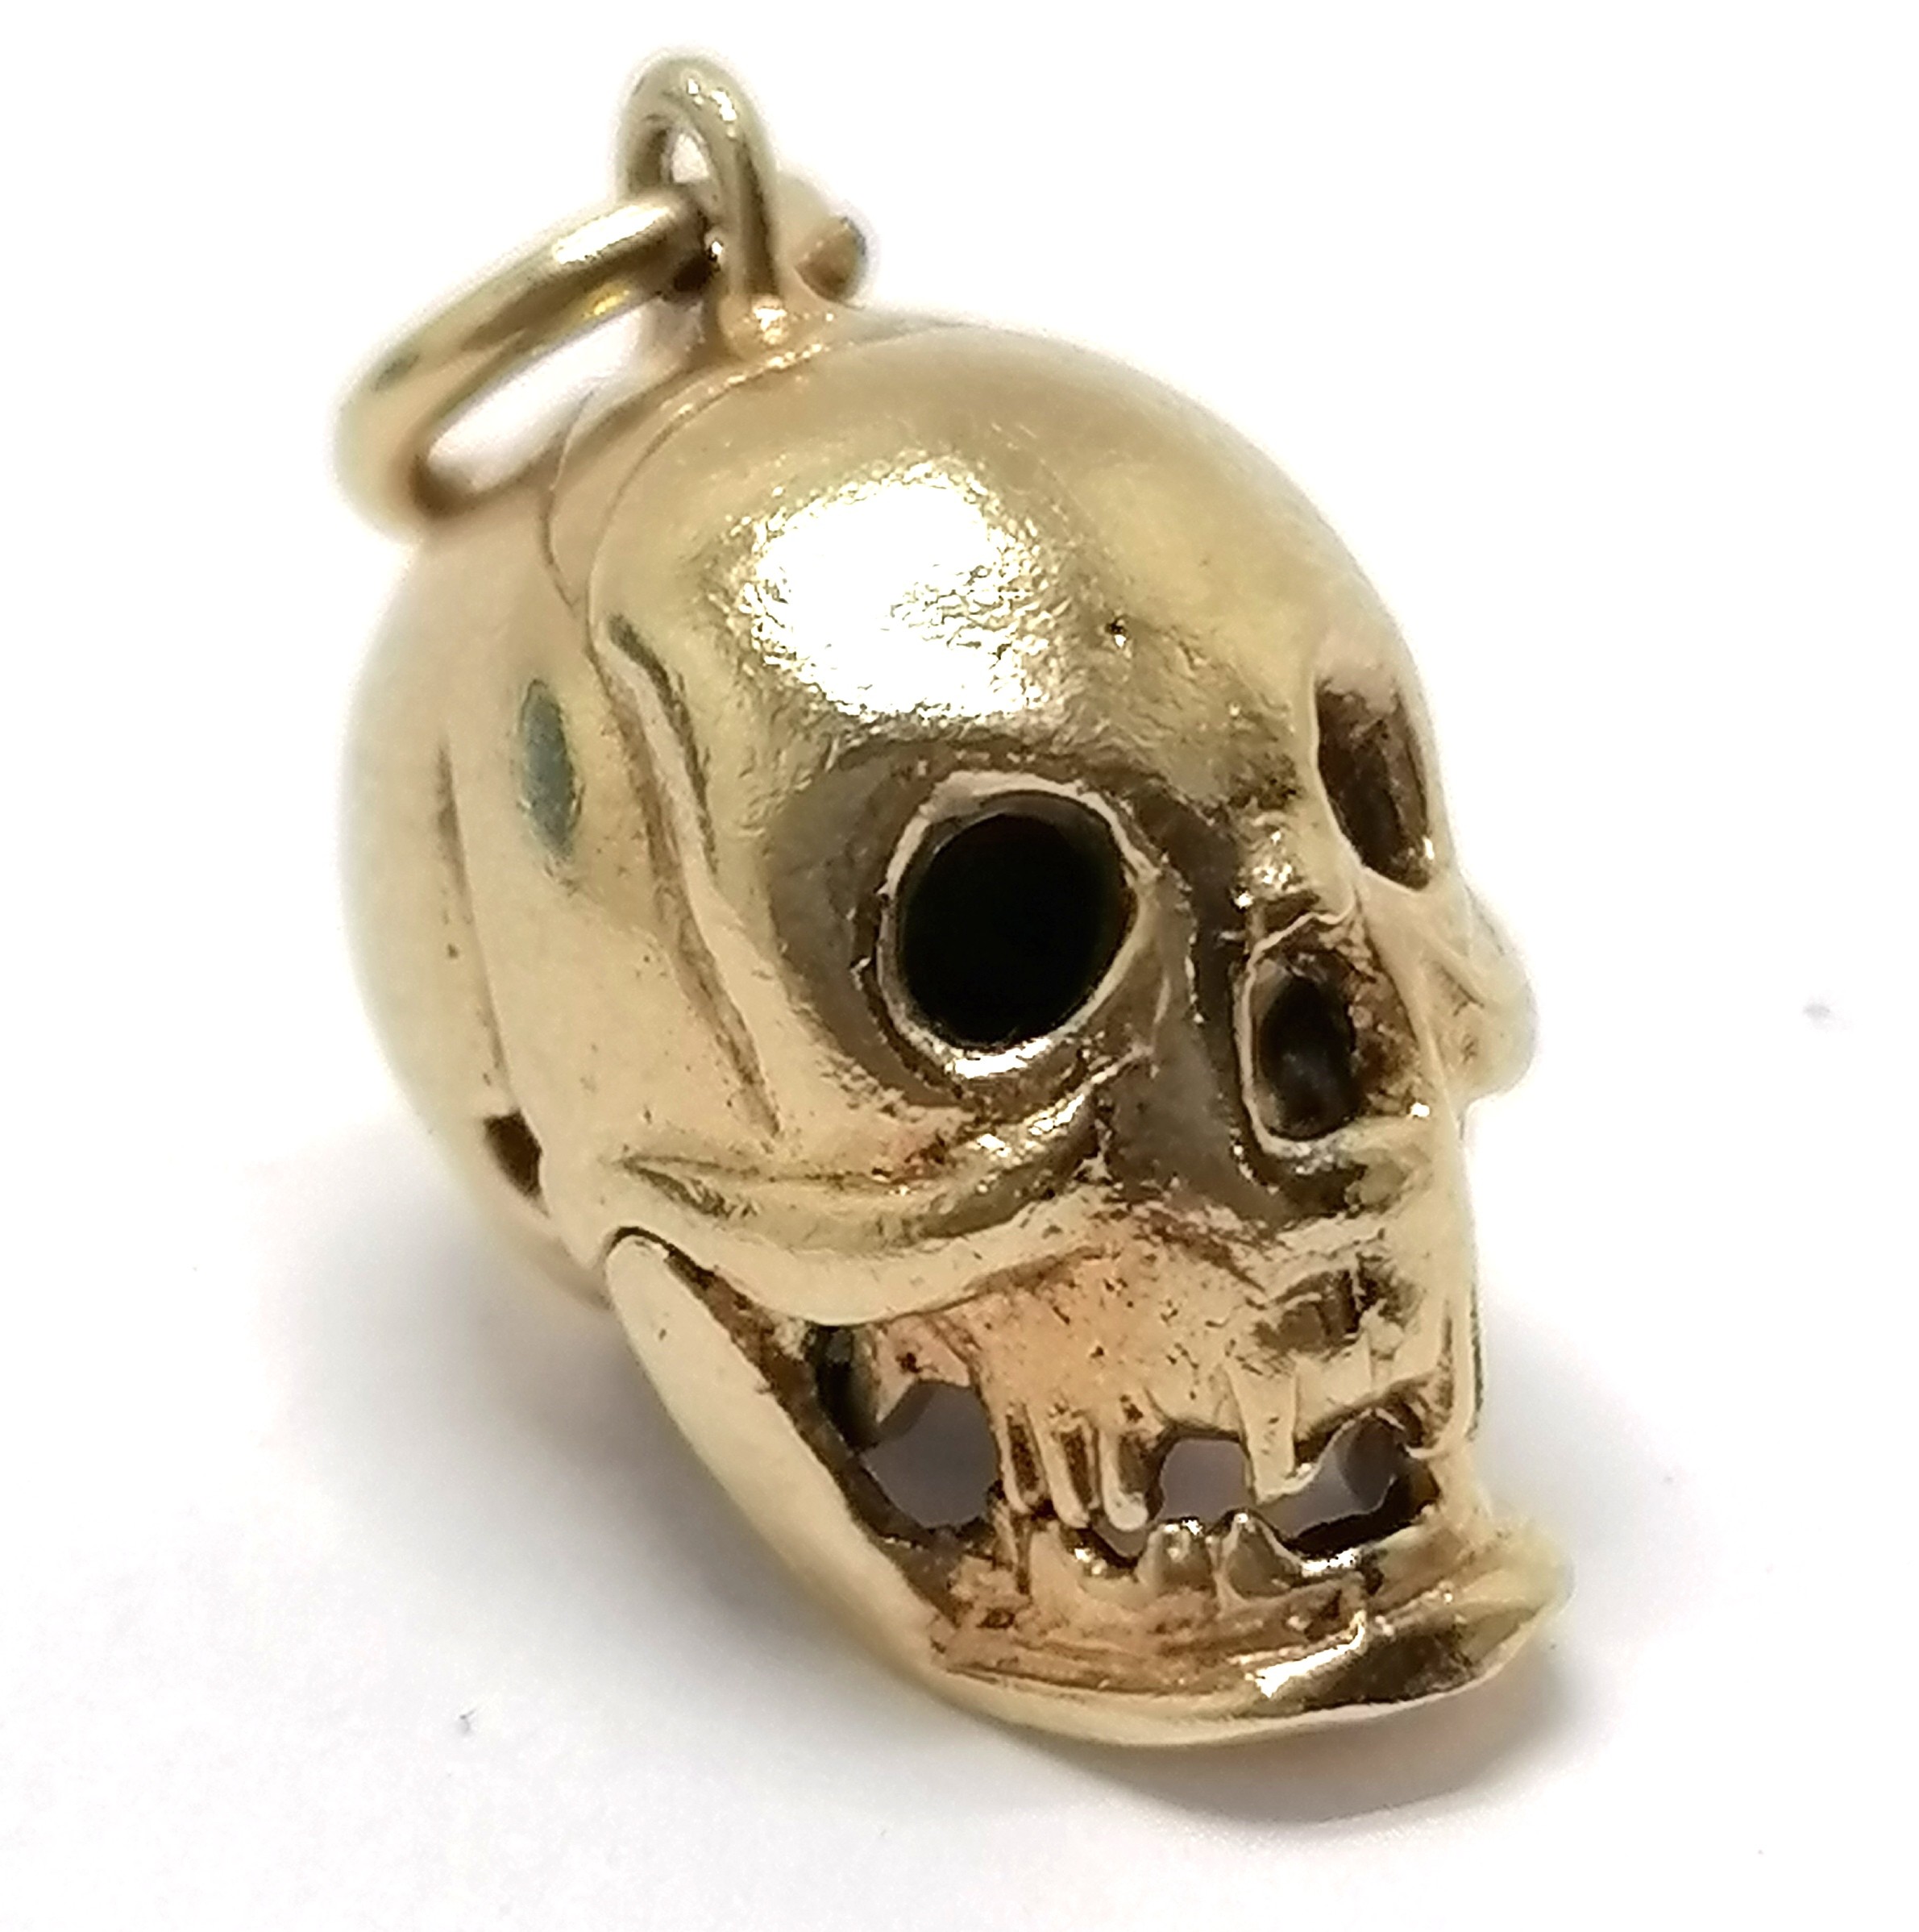 9ct hallmarked gold skull charm / pendant with articulated jaw 1cm high 2.6g